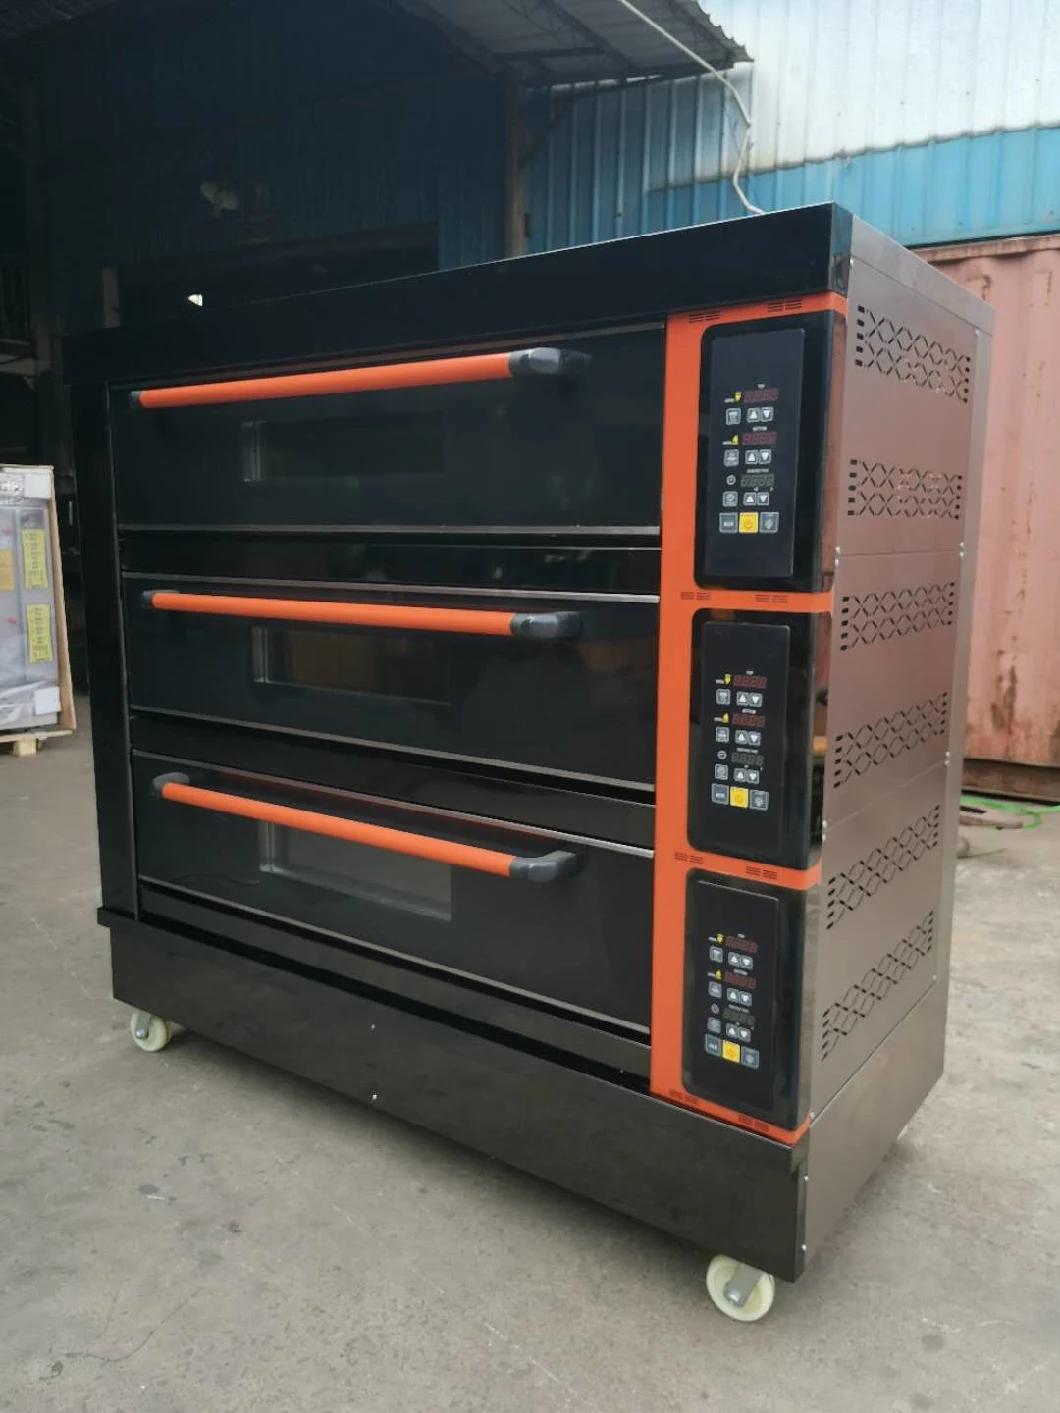 Bakery Equipment 3 Deck 9 Trays Commercial Intelligent Electric Deck Oven